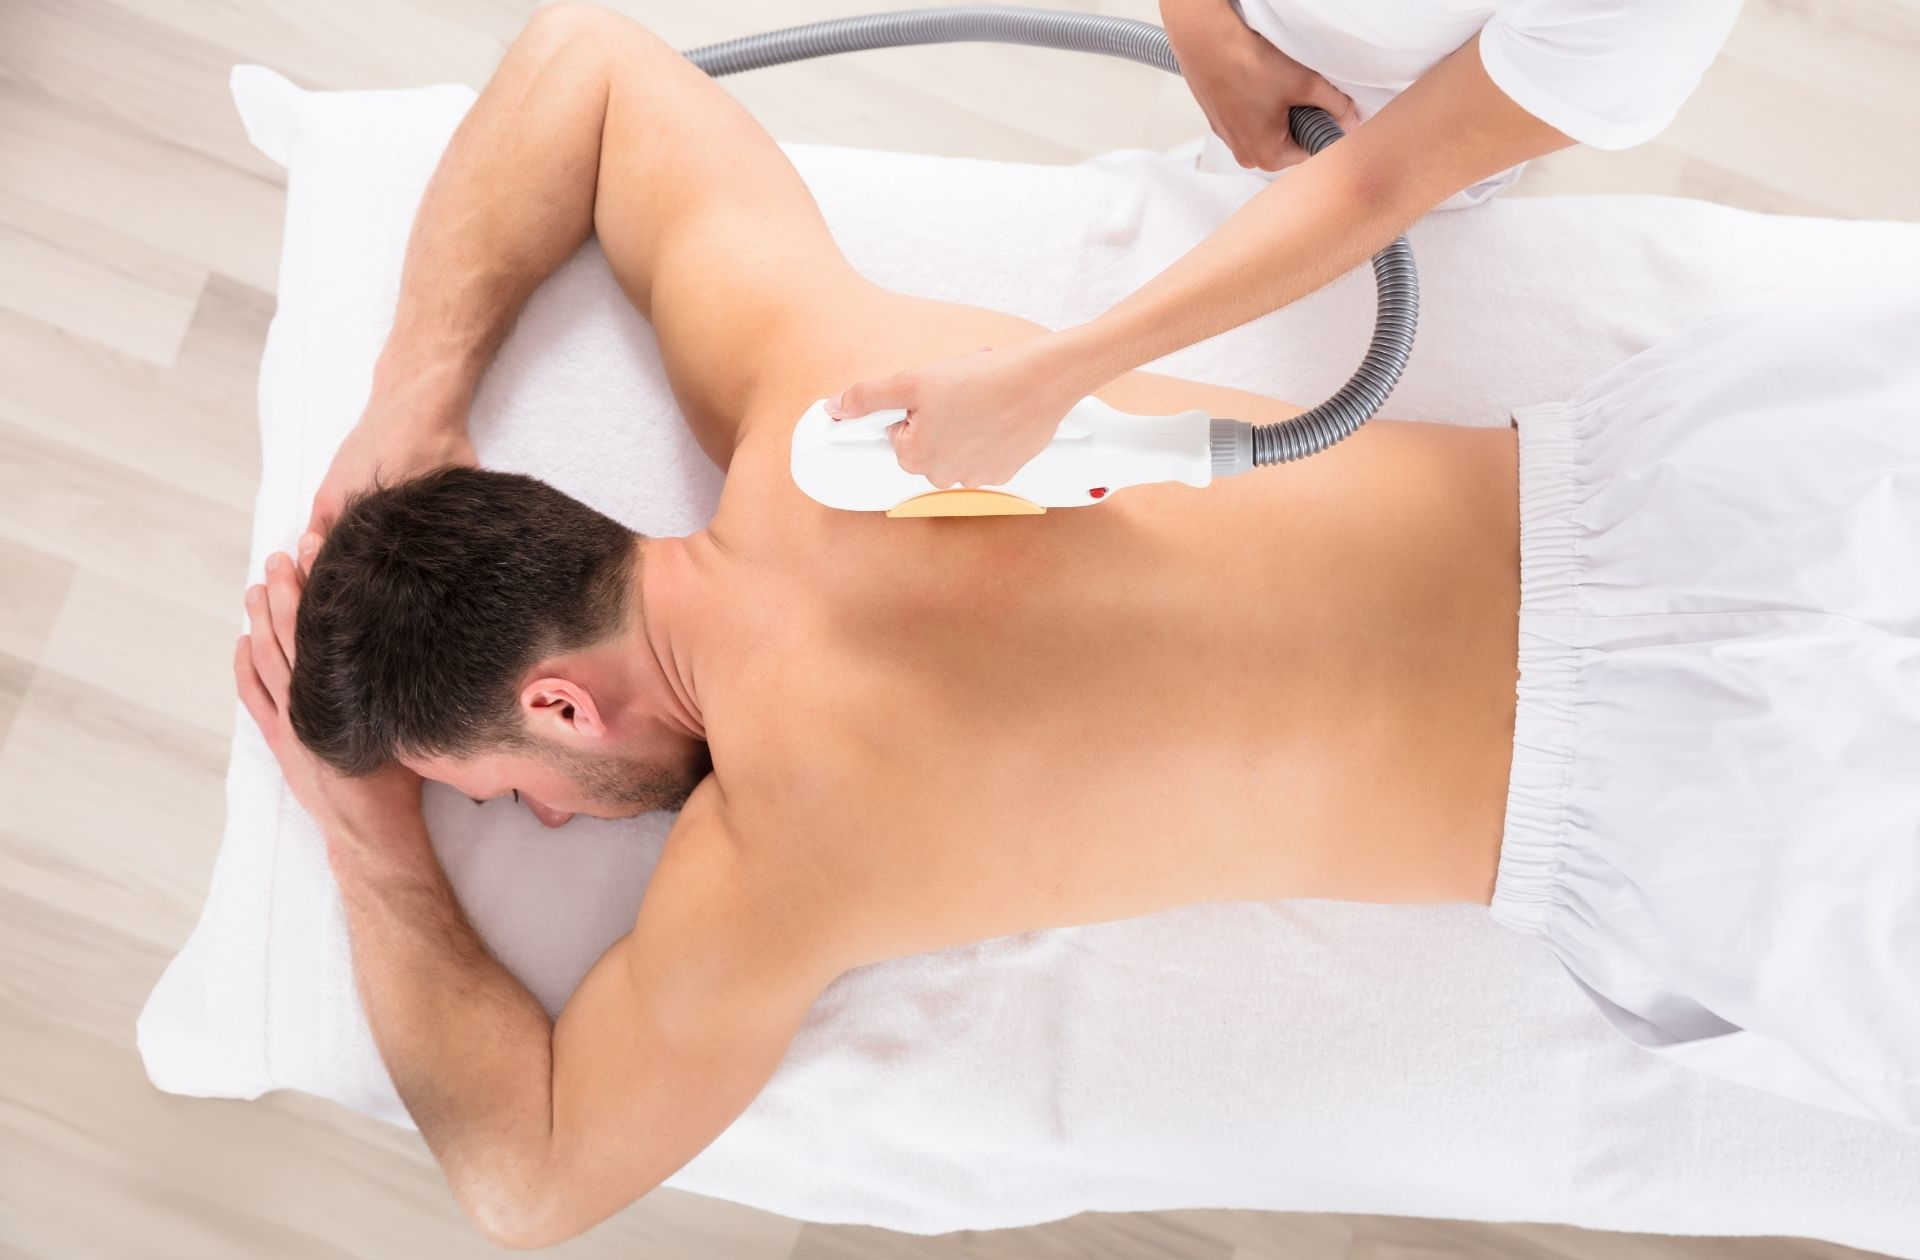 Laser Hair Removal for Men - Back Hair Removal - Pure Skin Beauty